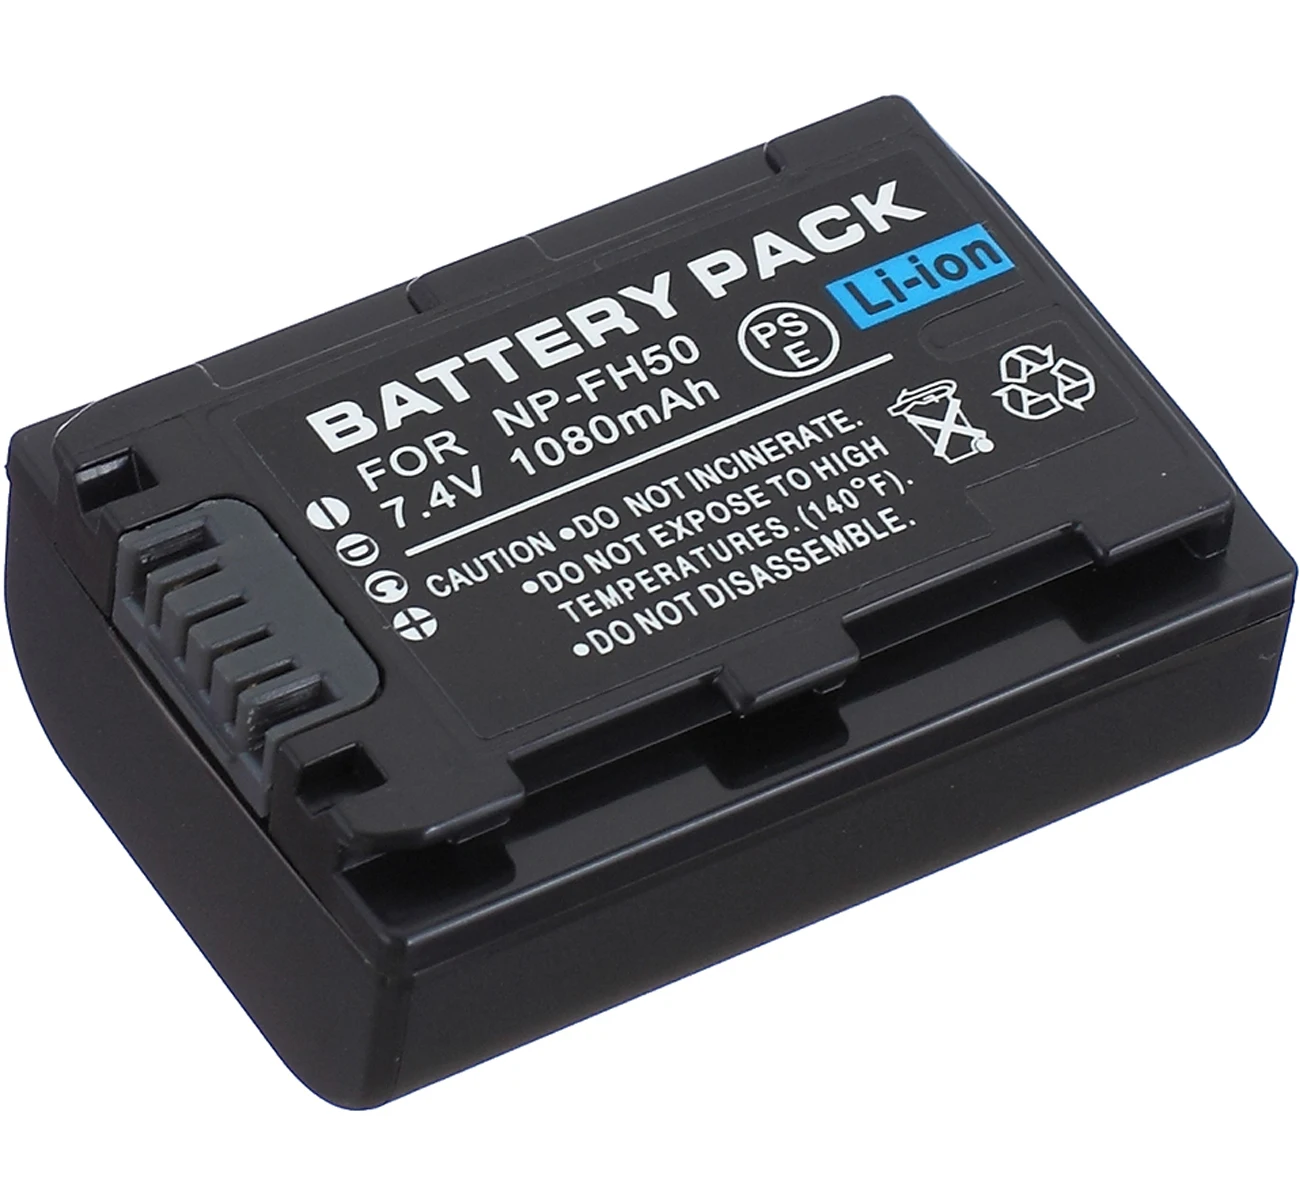 Kastar Battery Charger Kit fits Sony NP-FH30 NP-FH40 NP-FH50 NP-FH60 NP-FH70 NP-FH100 NP-FP50 NP-FP51 NP-FP70 NP-FP71 NP-FP90 NP-FP91 NP-FV30 NP-FV50 NP-FV70 NP-FV90 NP-FV100 Battery and Charger 